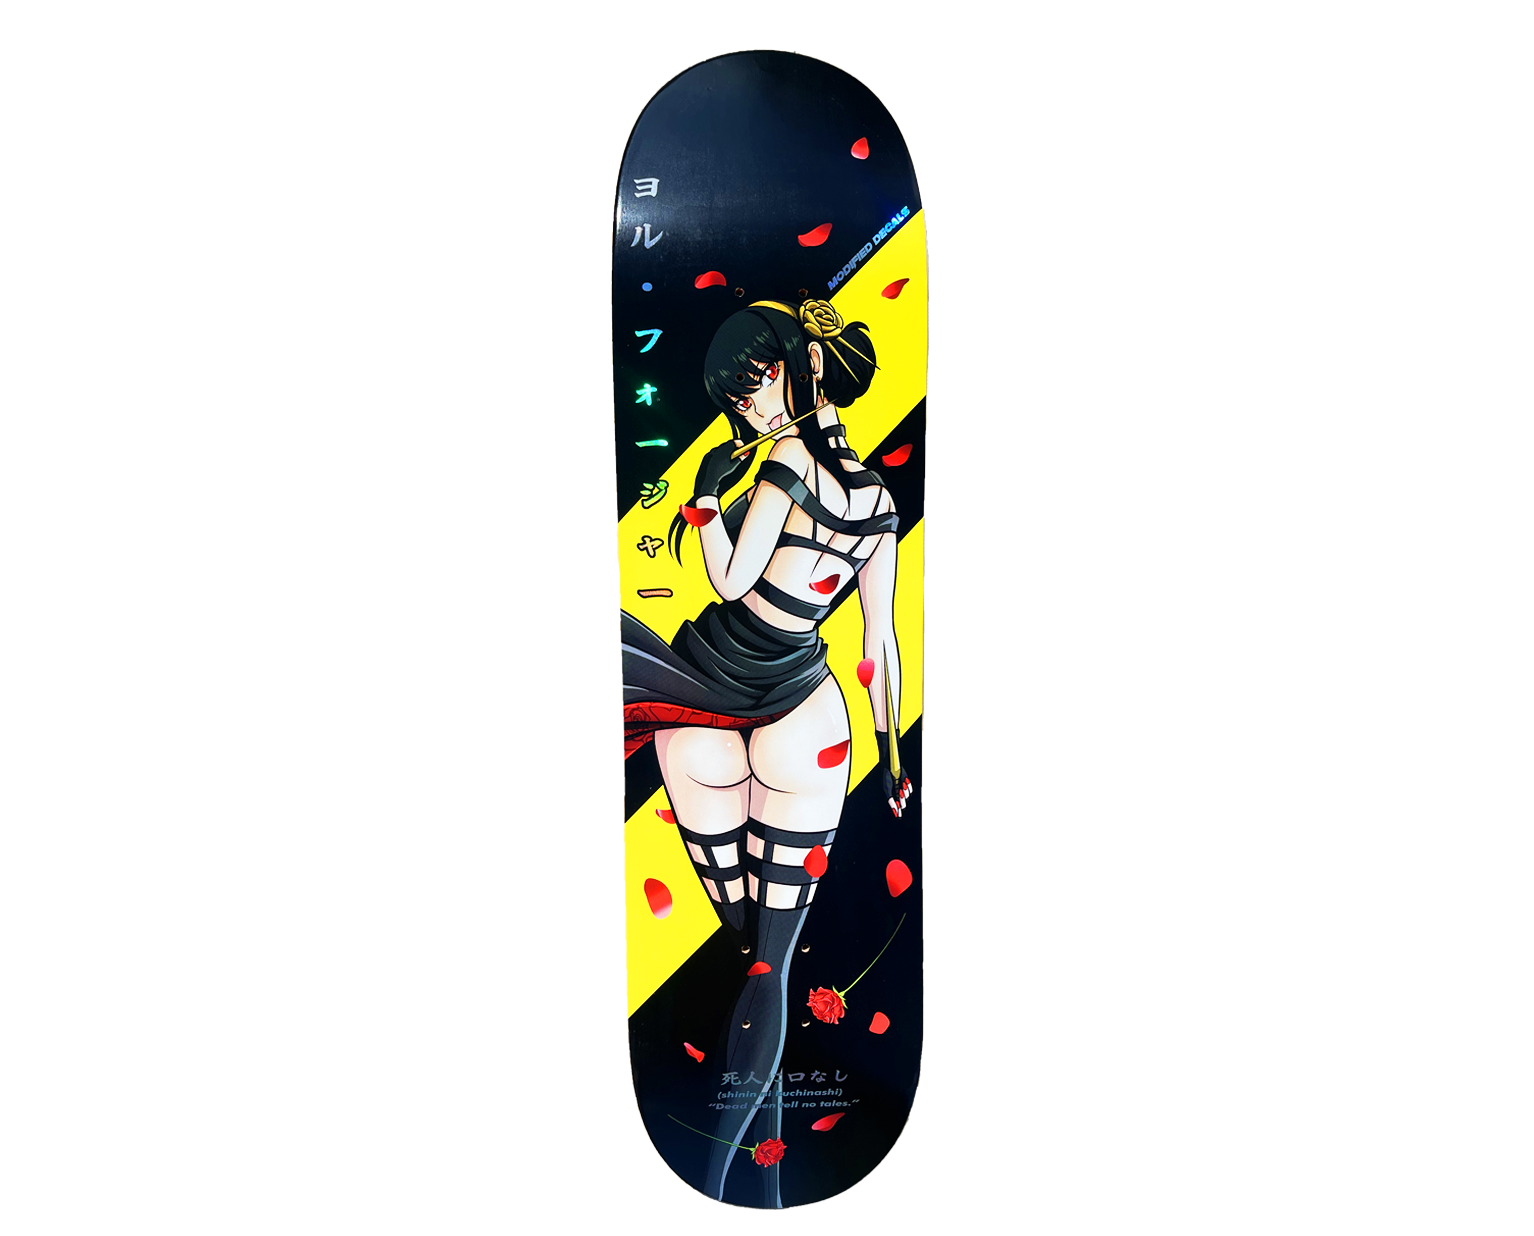 Sporty nerds gather in Nagano to show off their anime and manga-inspired  snowboards | SoraNews24 -Japan News-